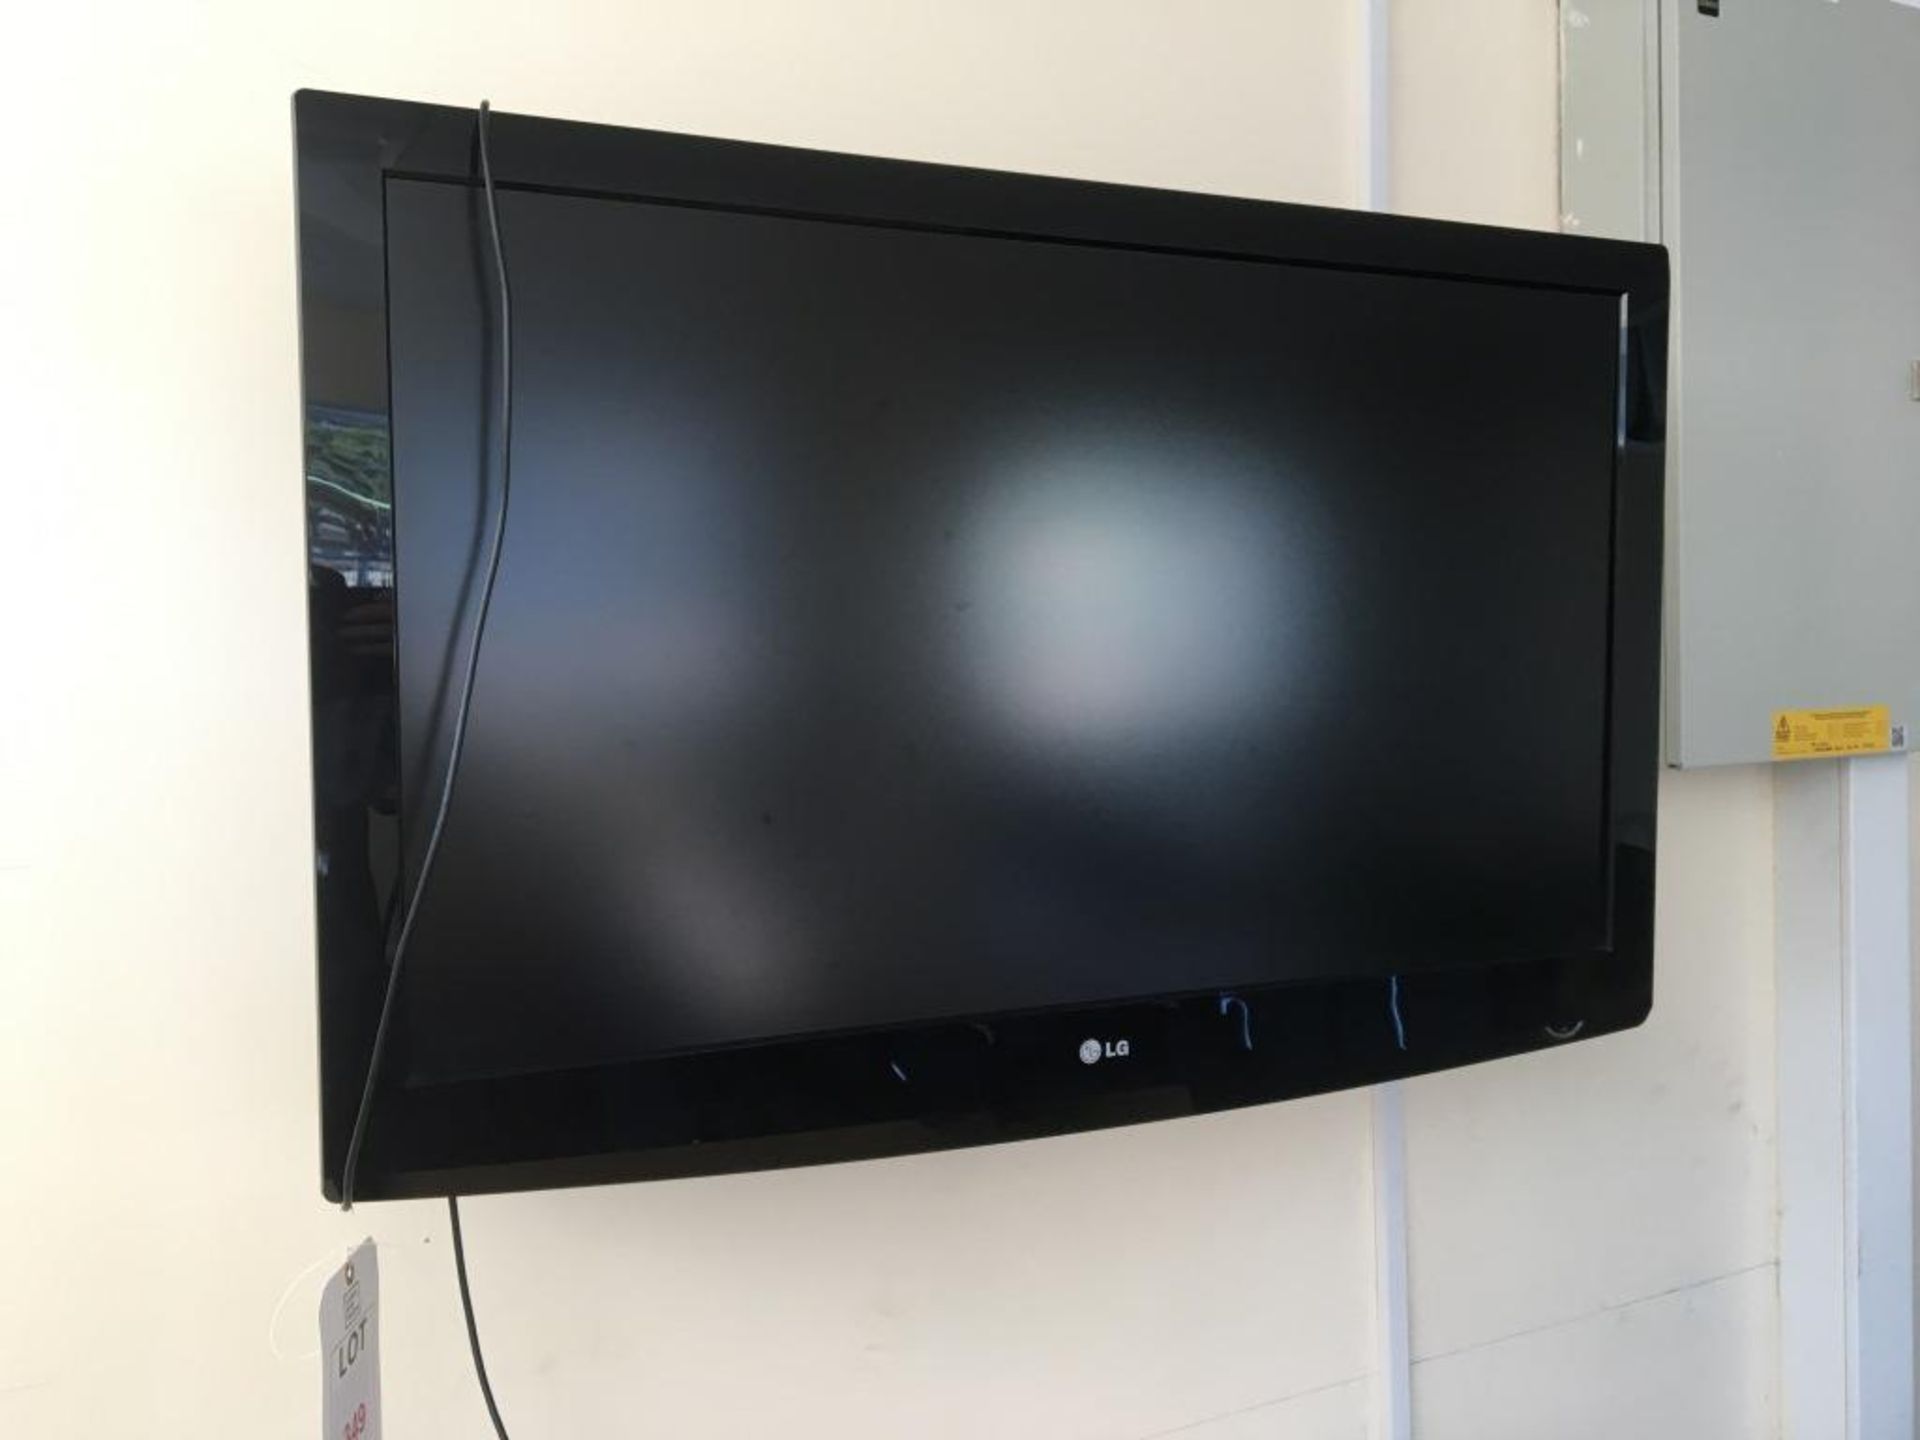 LG 42LG3000 television with wall mount bracket and remote - Image 2 of 2